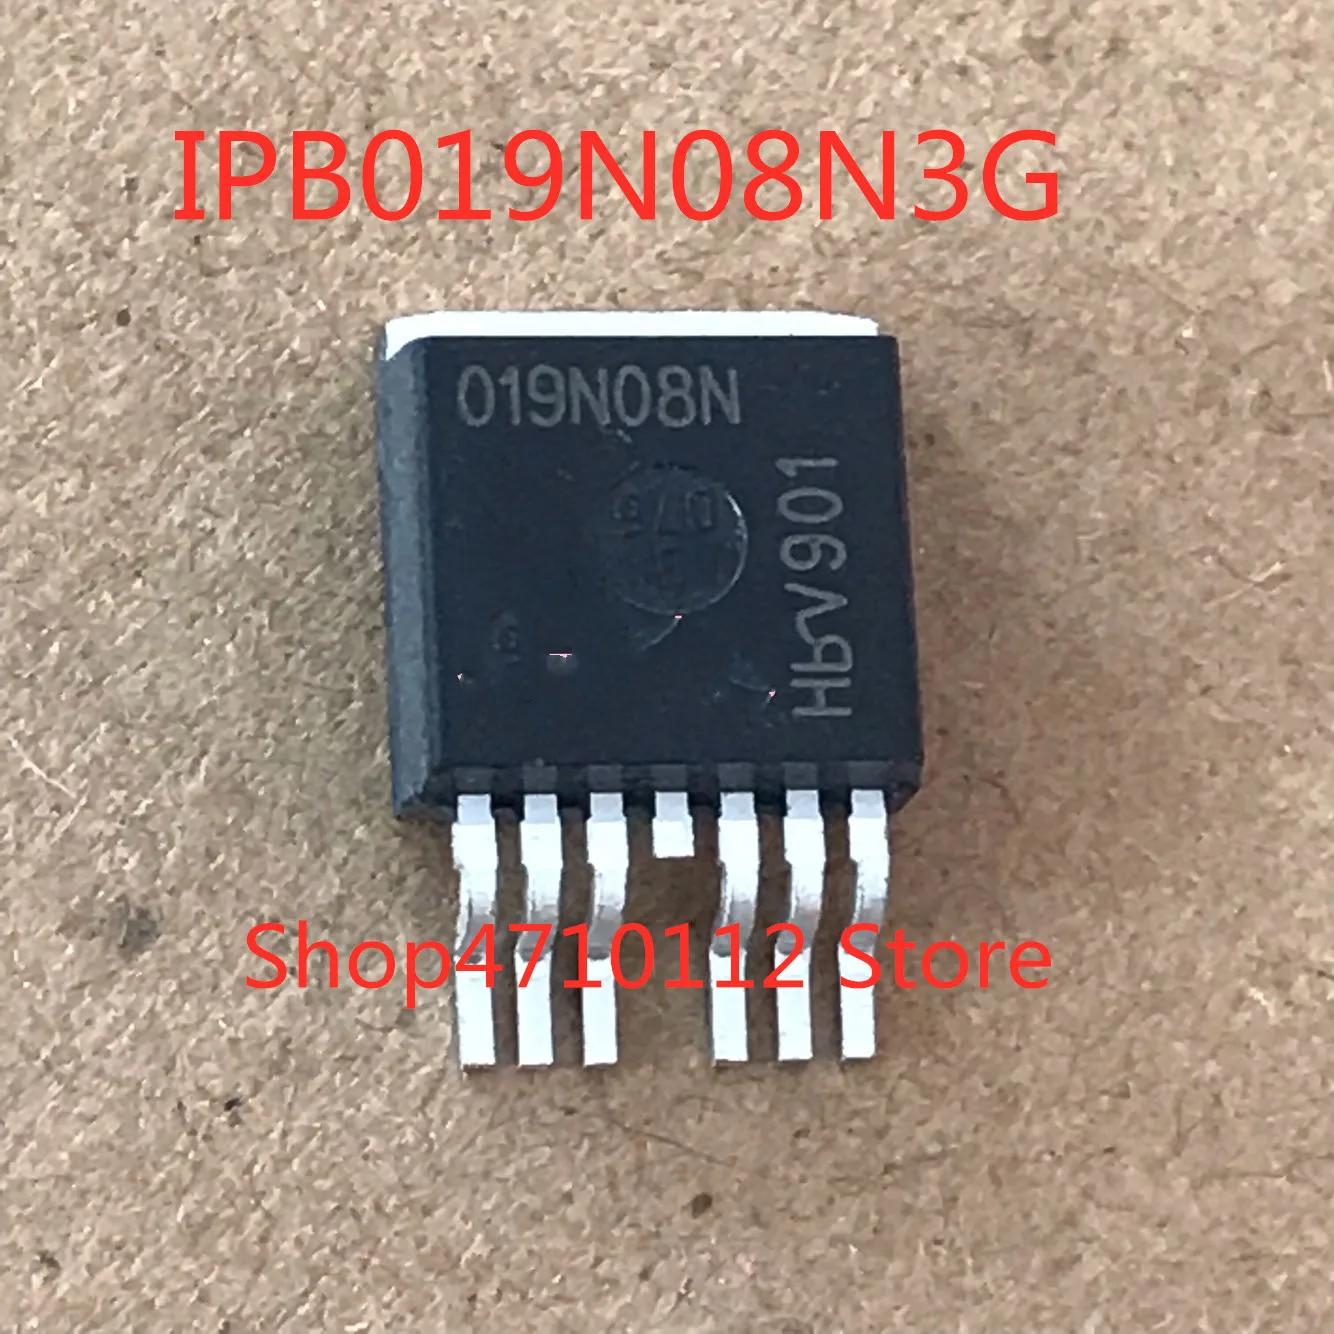 Free shipping 10PCS/LOT NEW 019N08N IPB019N08N3G IPB019N08N3 TO263